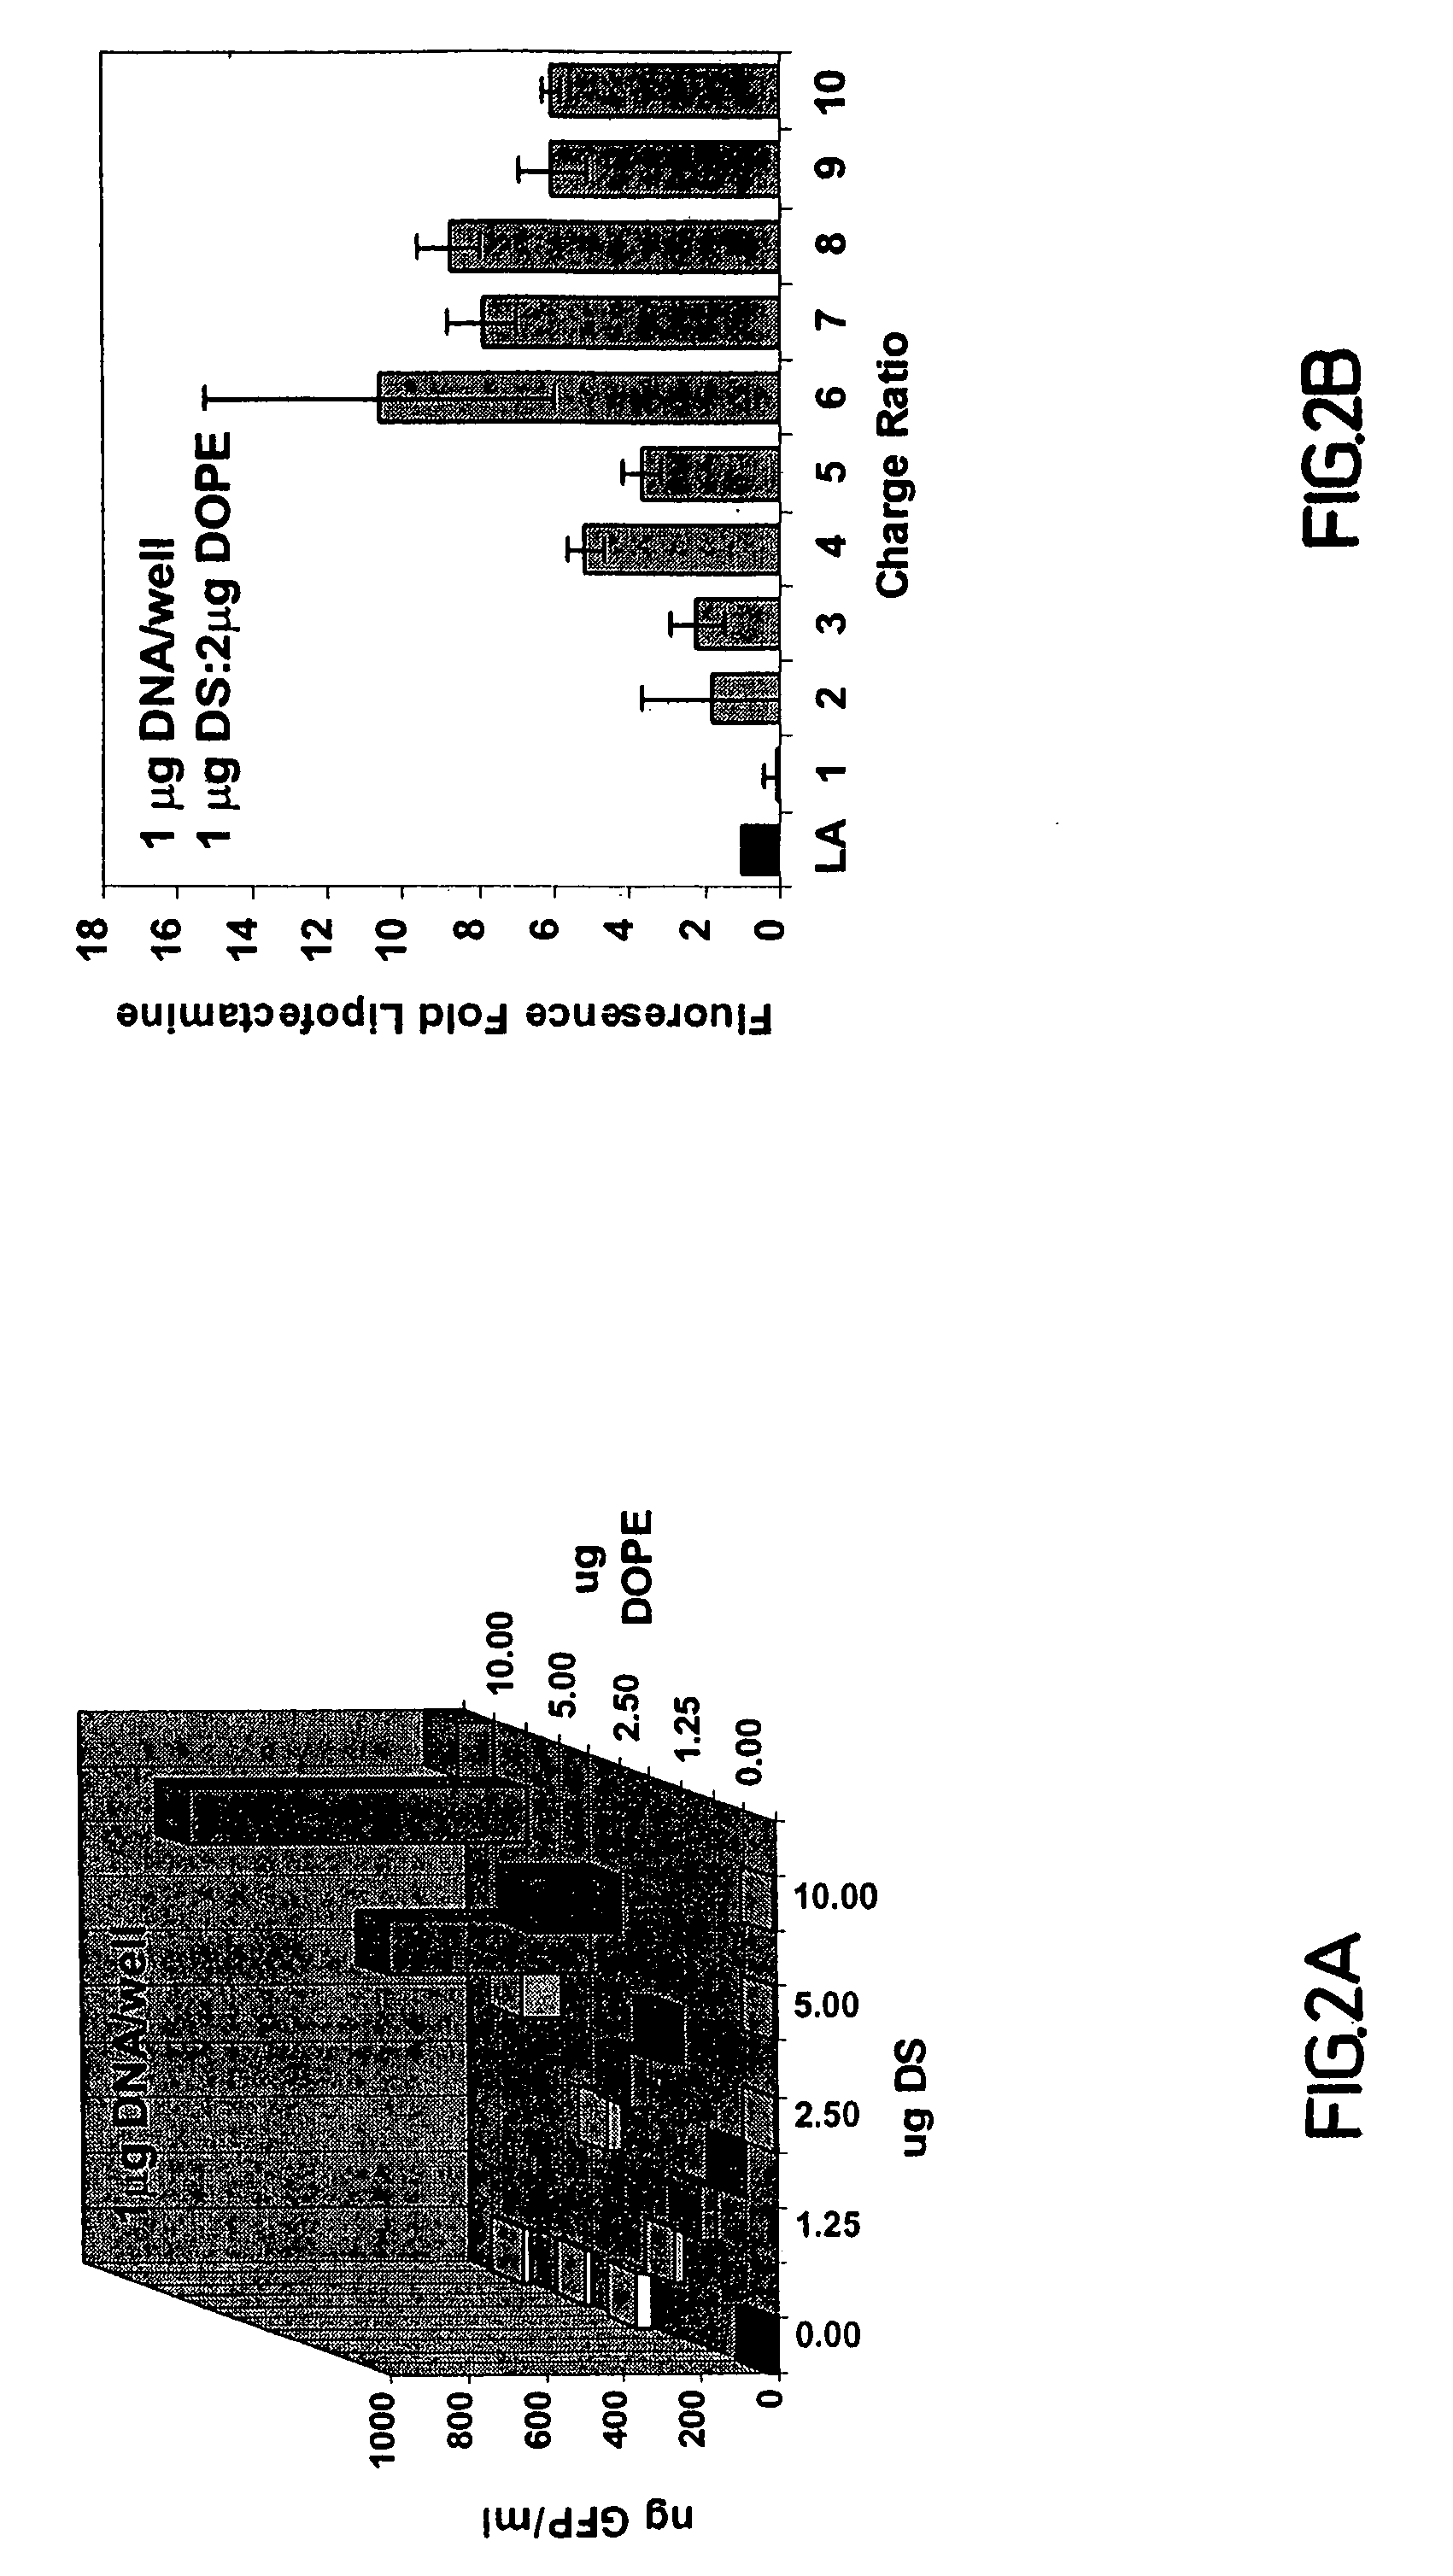 Synthesis and use of reagents for improved DNA lipofection and/or slow release prodrug and drug therapies